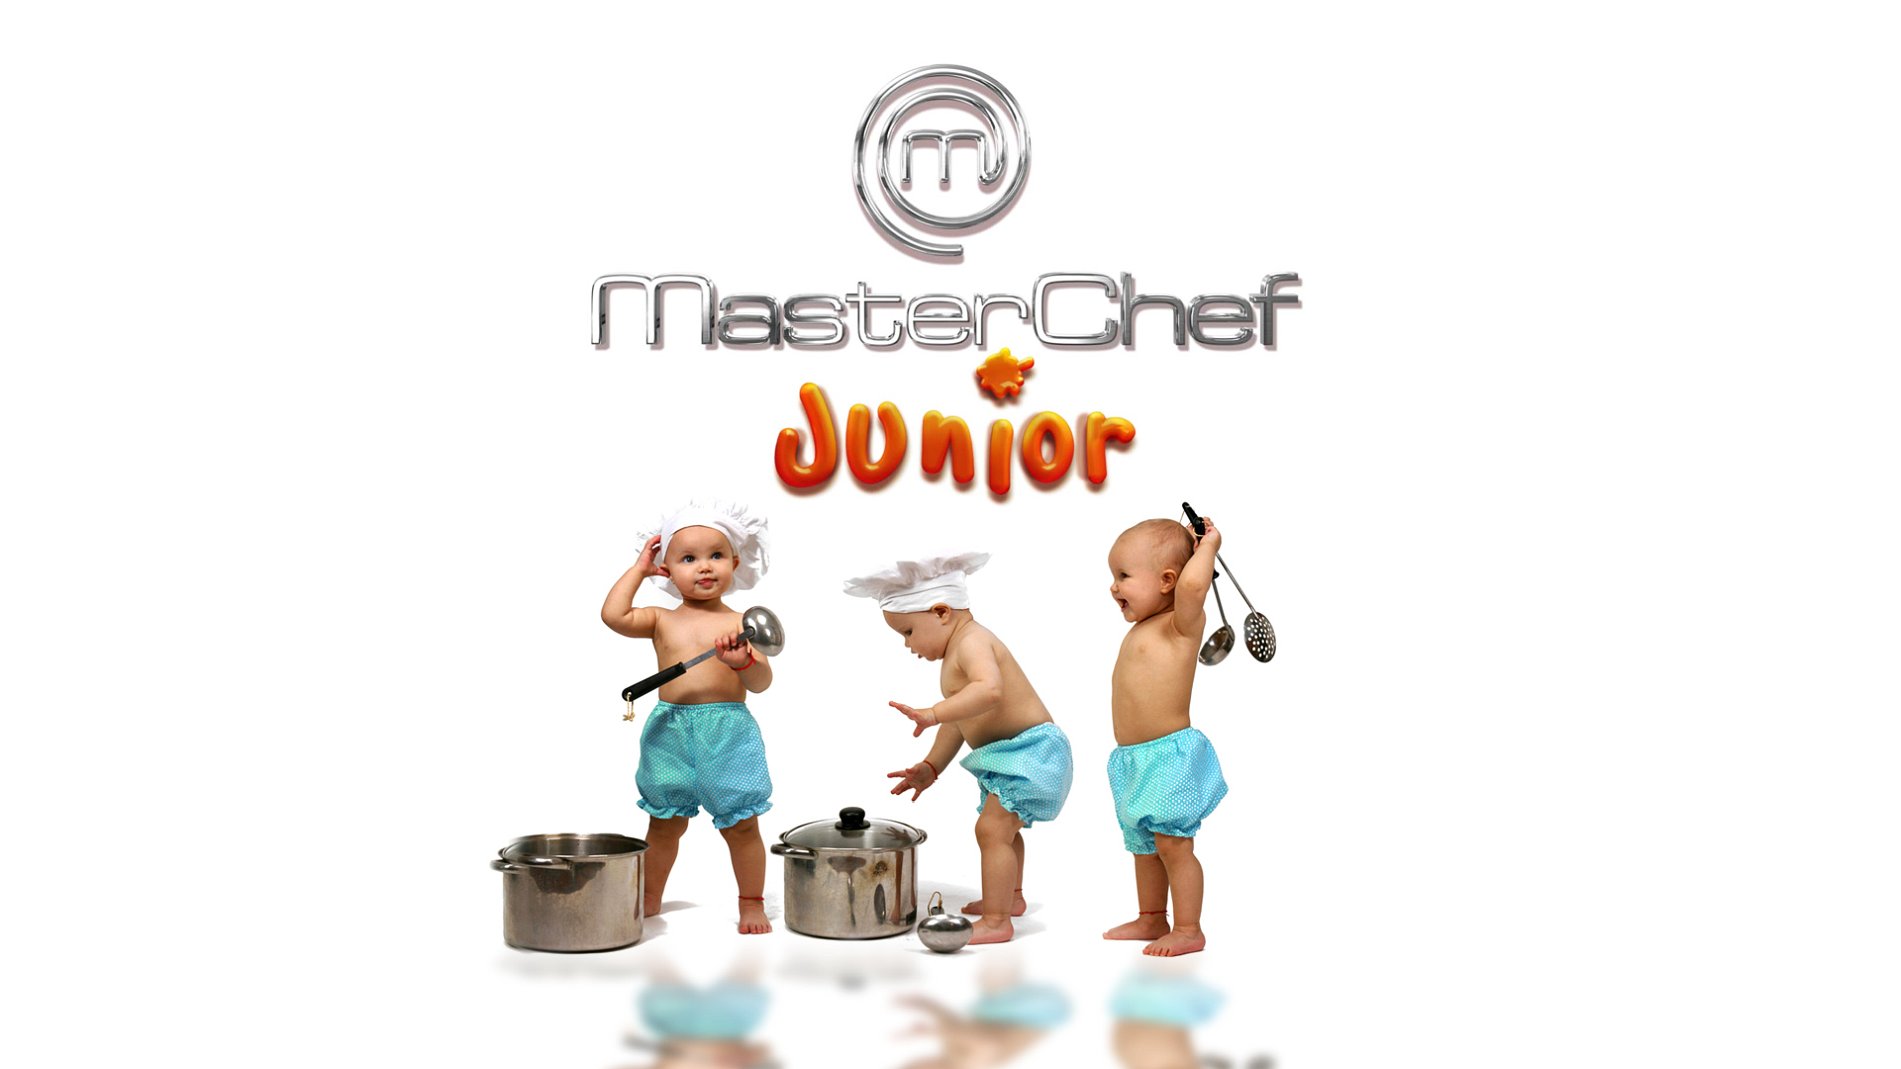 What Time Does 'MasterChef Junior' Come On Tonight?